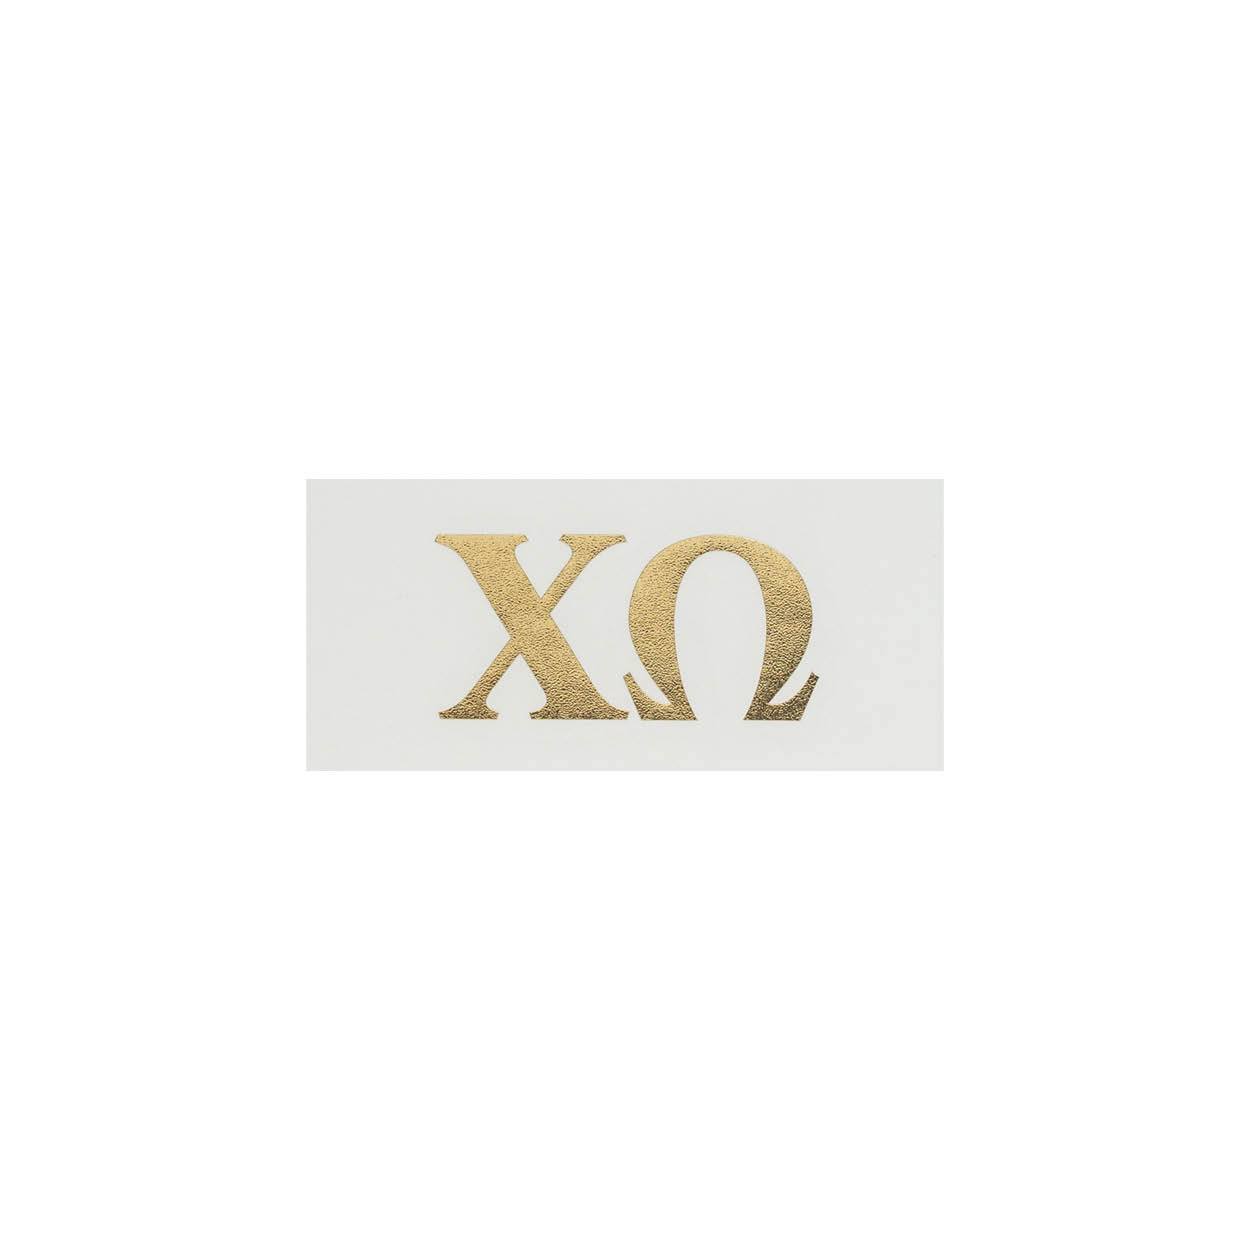 Gold Foil Decal Greek in Chi Omega at Wrapsody